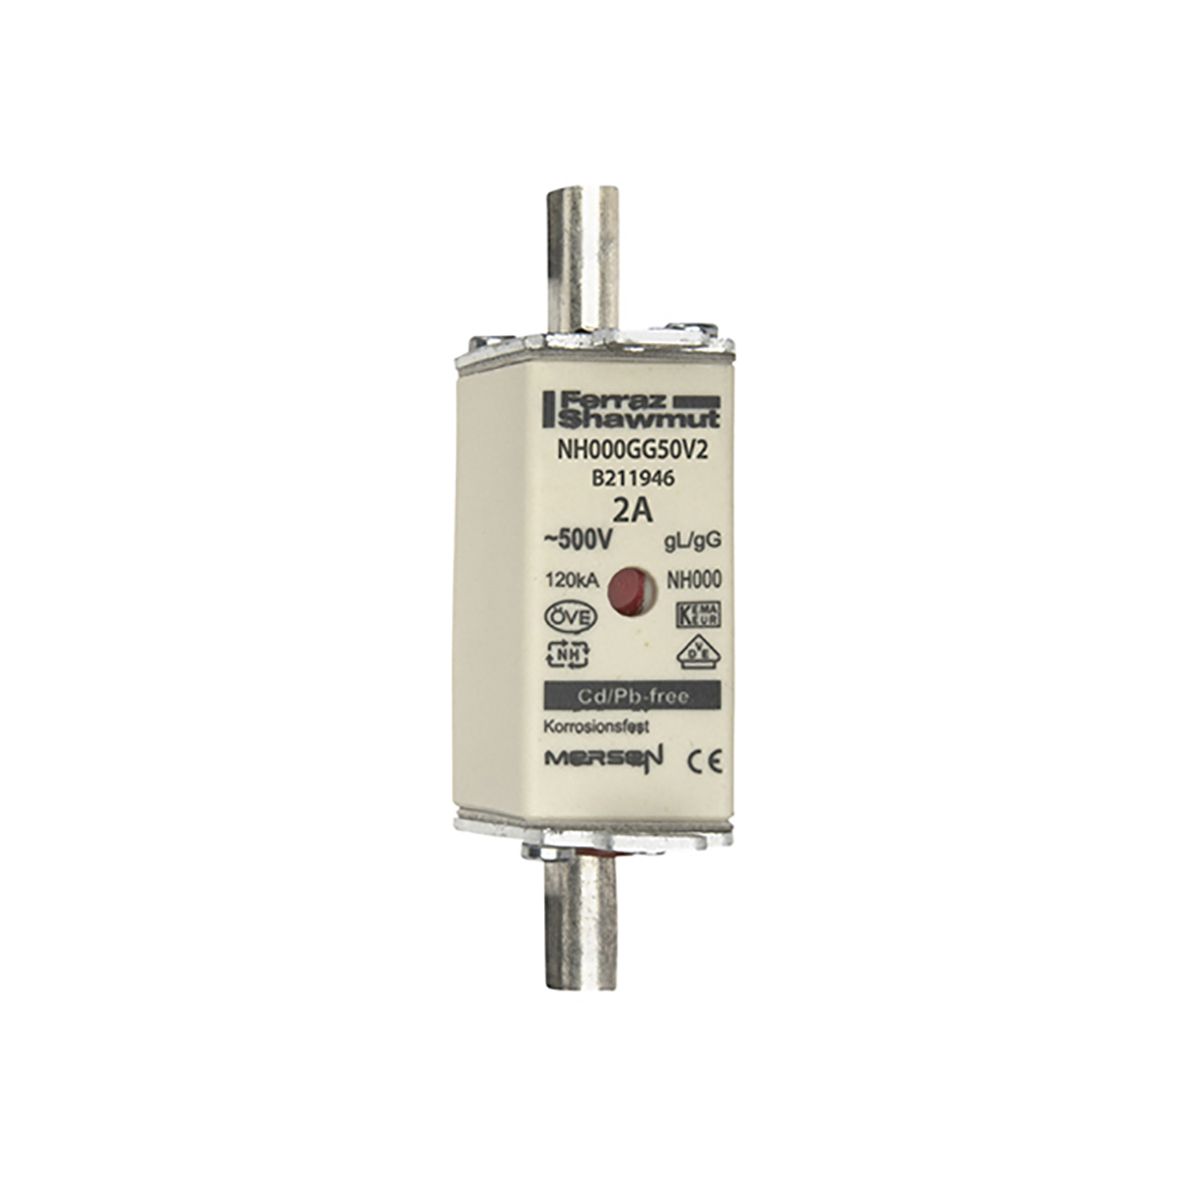 B211946 - NH fuse-link gG, 500VAC, size 000, 2A double indicator/live tags